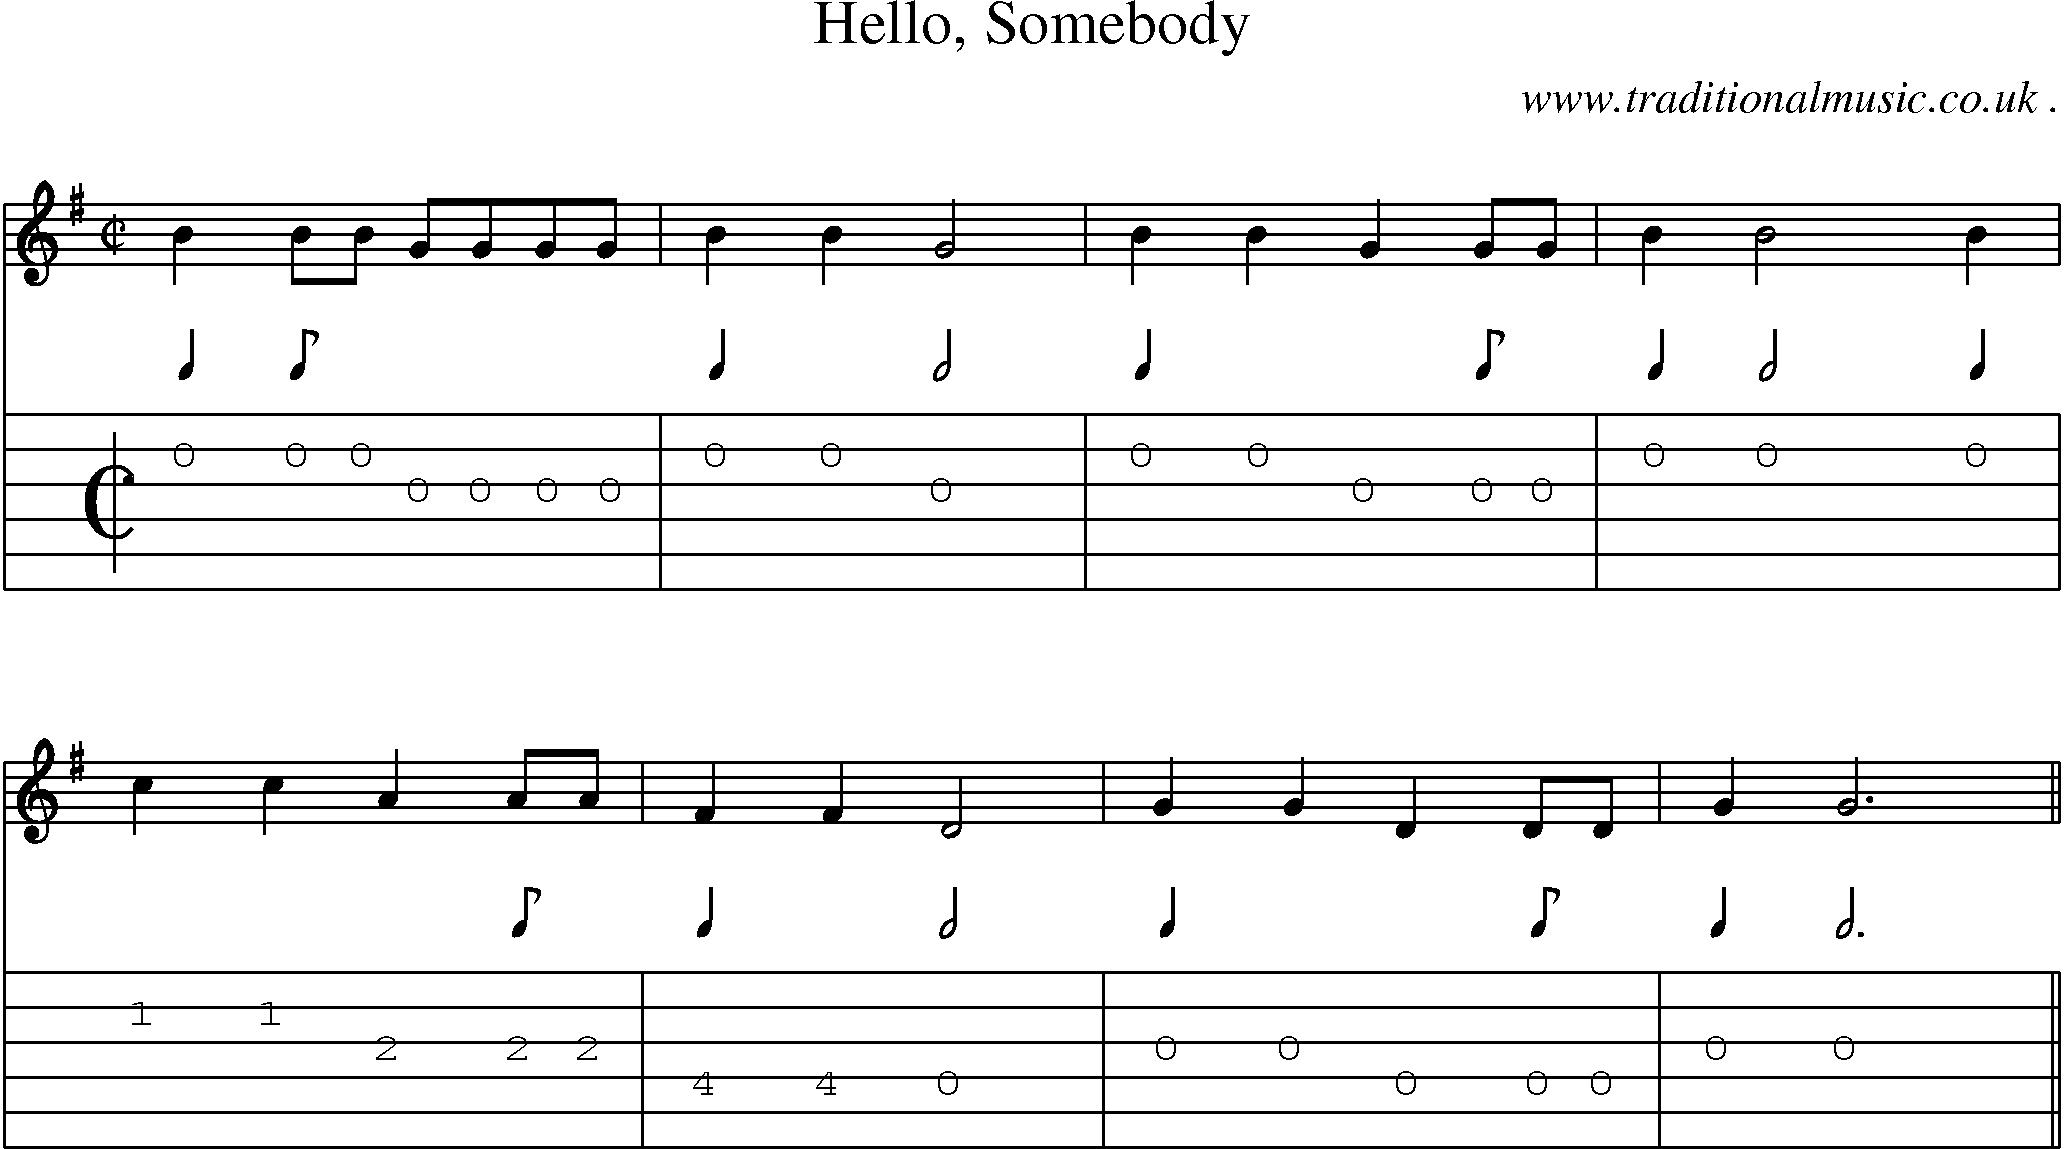 Sheet-Music and Guitar Tabs for Hello Somebody